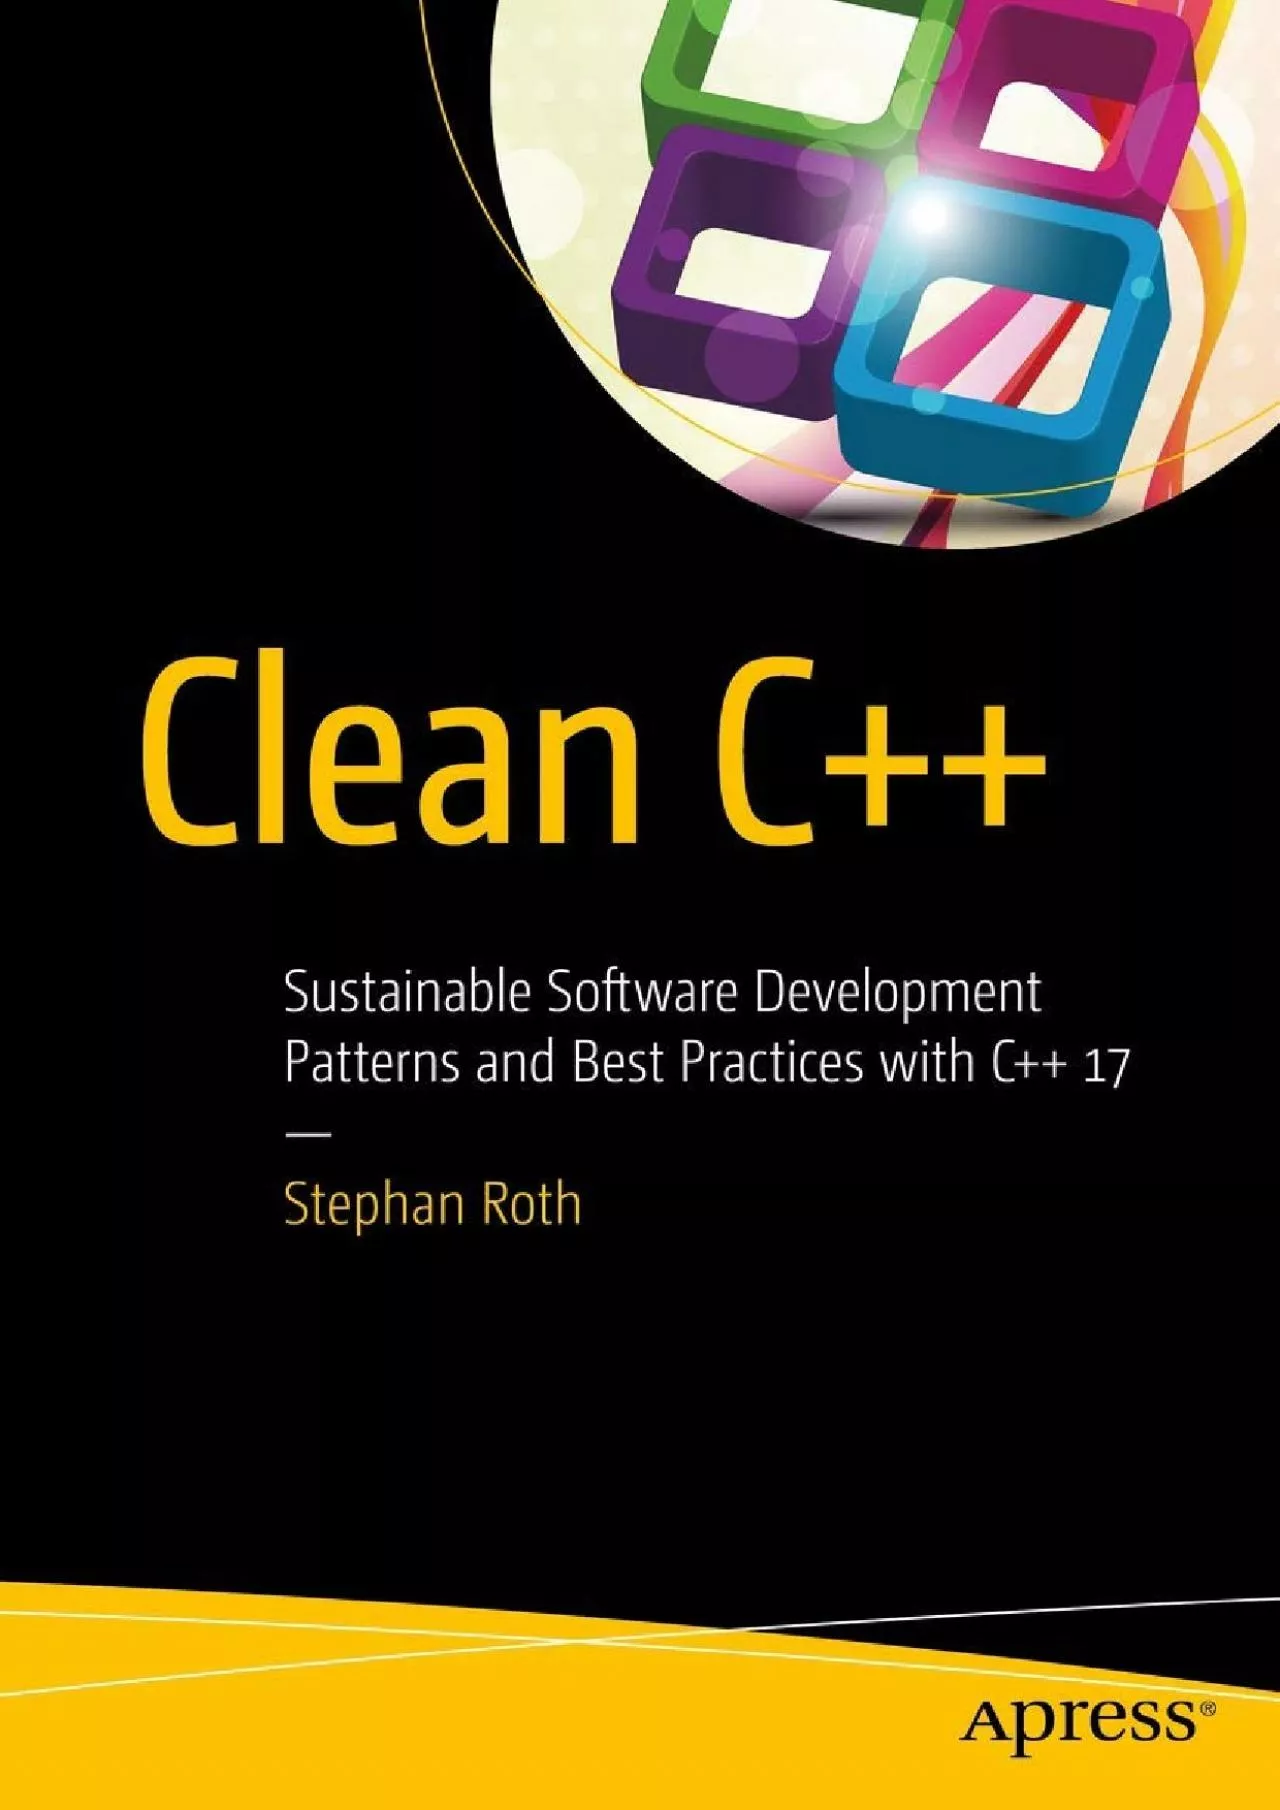 [PDF]-Clean C++: Sustainable Software Development Patterns and Best Practices with C++